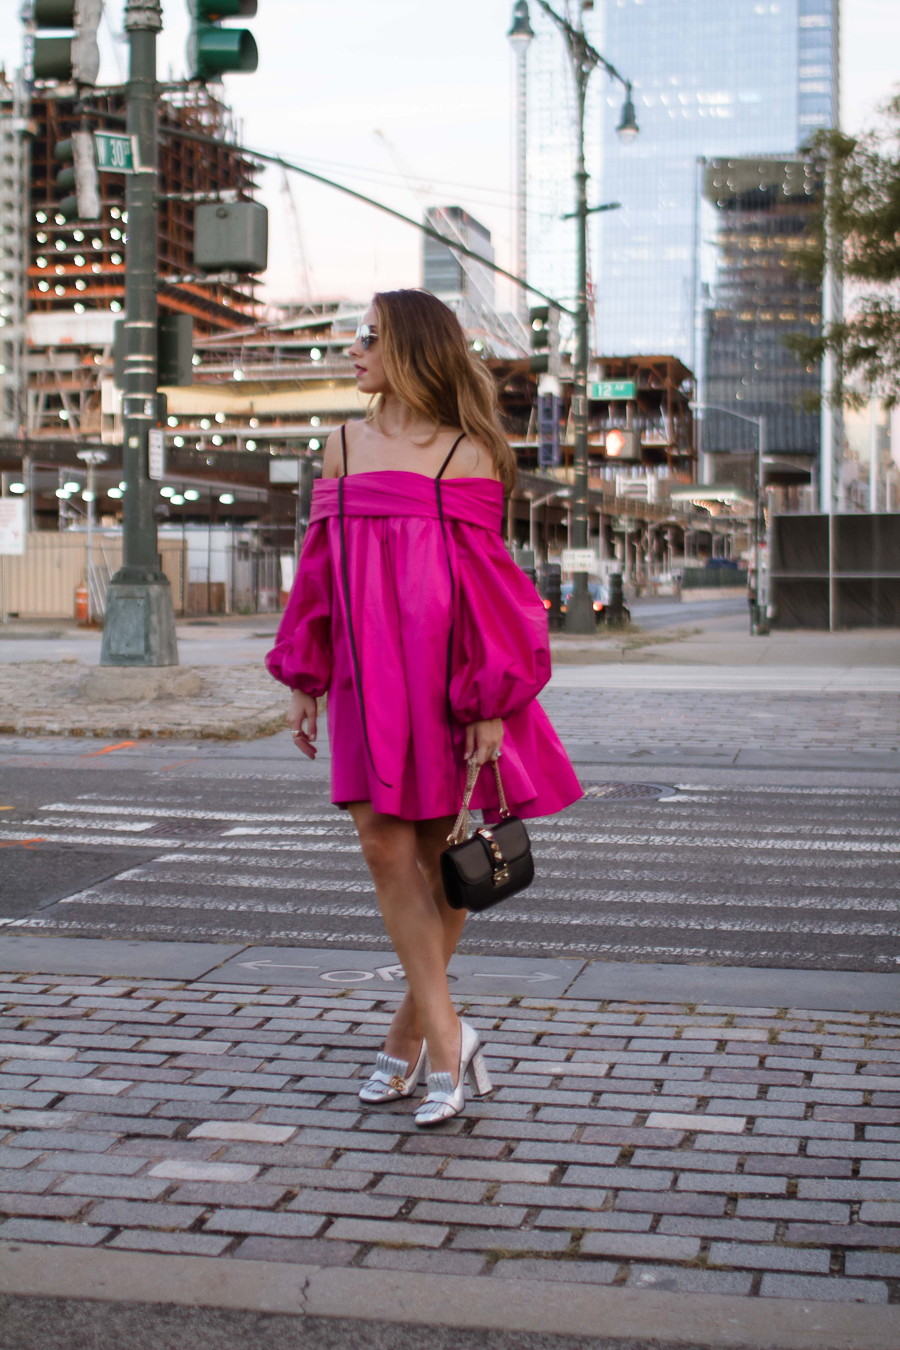 sabrina-chakici-clutch-and-carry-on-clutch-carry-on-uk-travel-blogger-nyfw-isa-arfen-pink-ress-gucci-silver-shoes-net-a-porter-helicopter-5